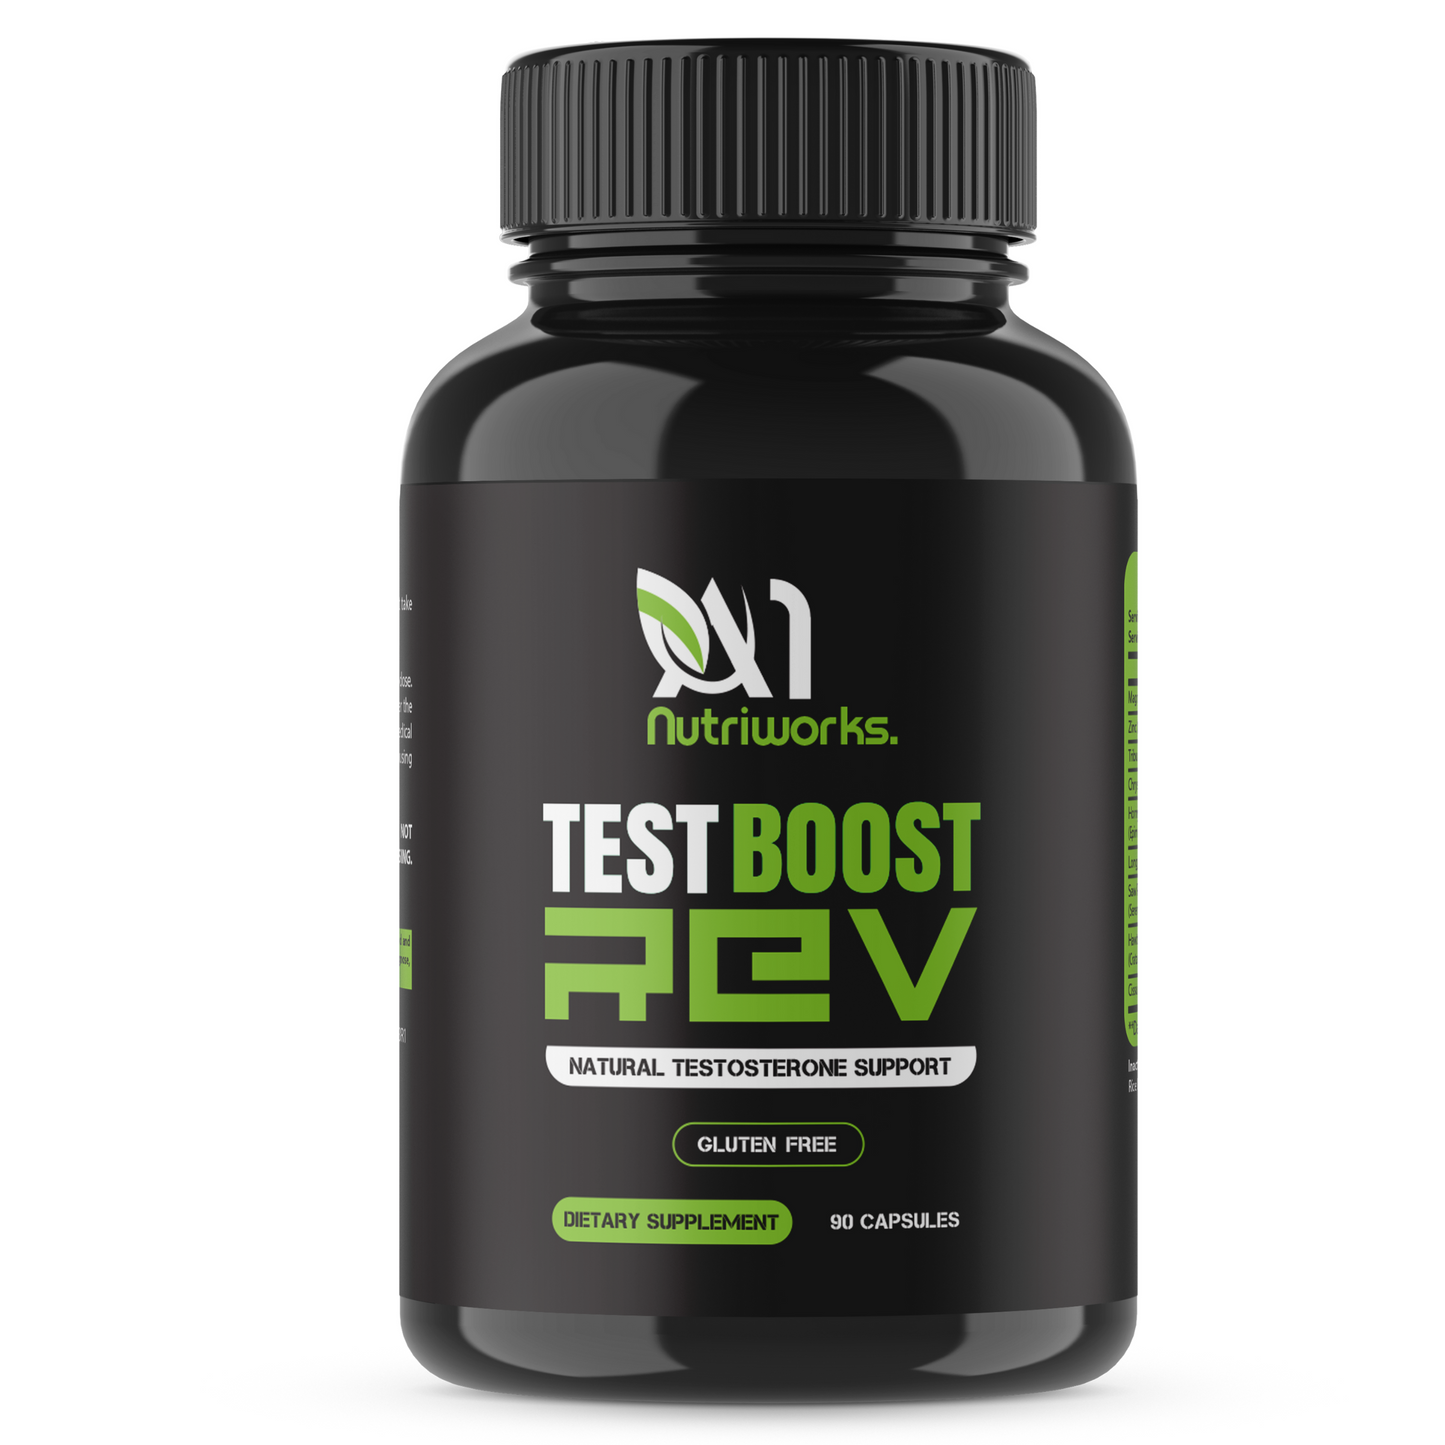 2 Month Supply -  Test Boost Max REV -  Maximum Performance Formula, Support Muscle and Strength